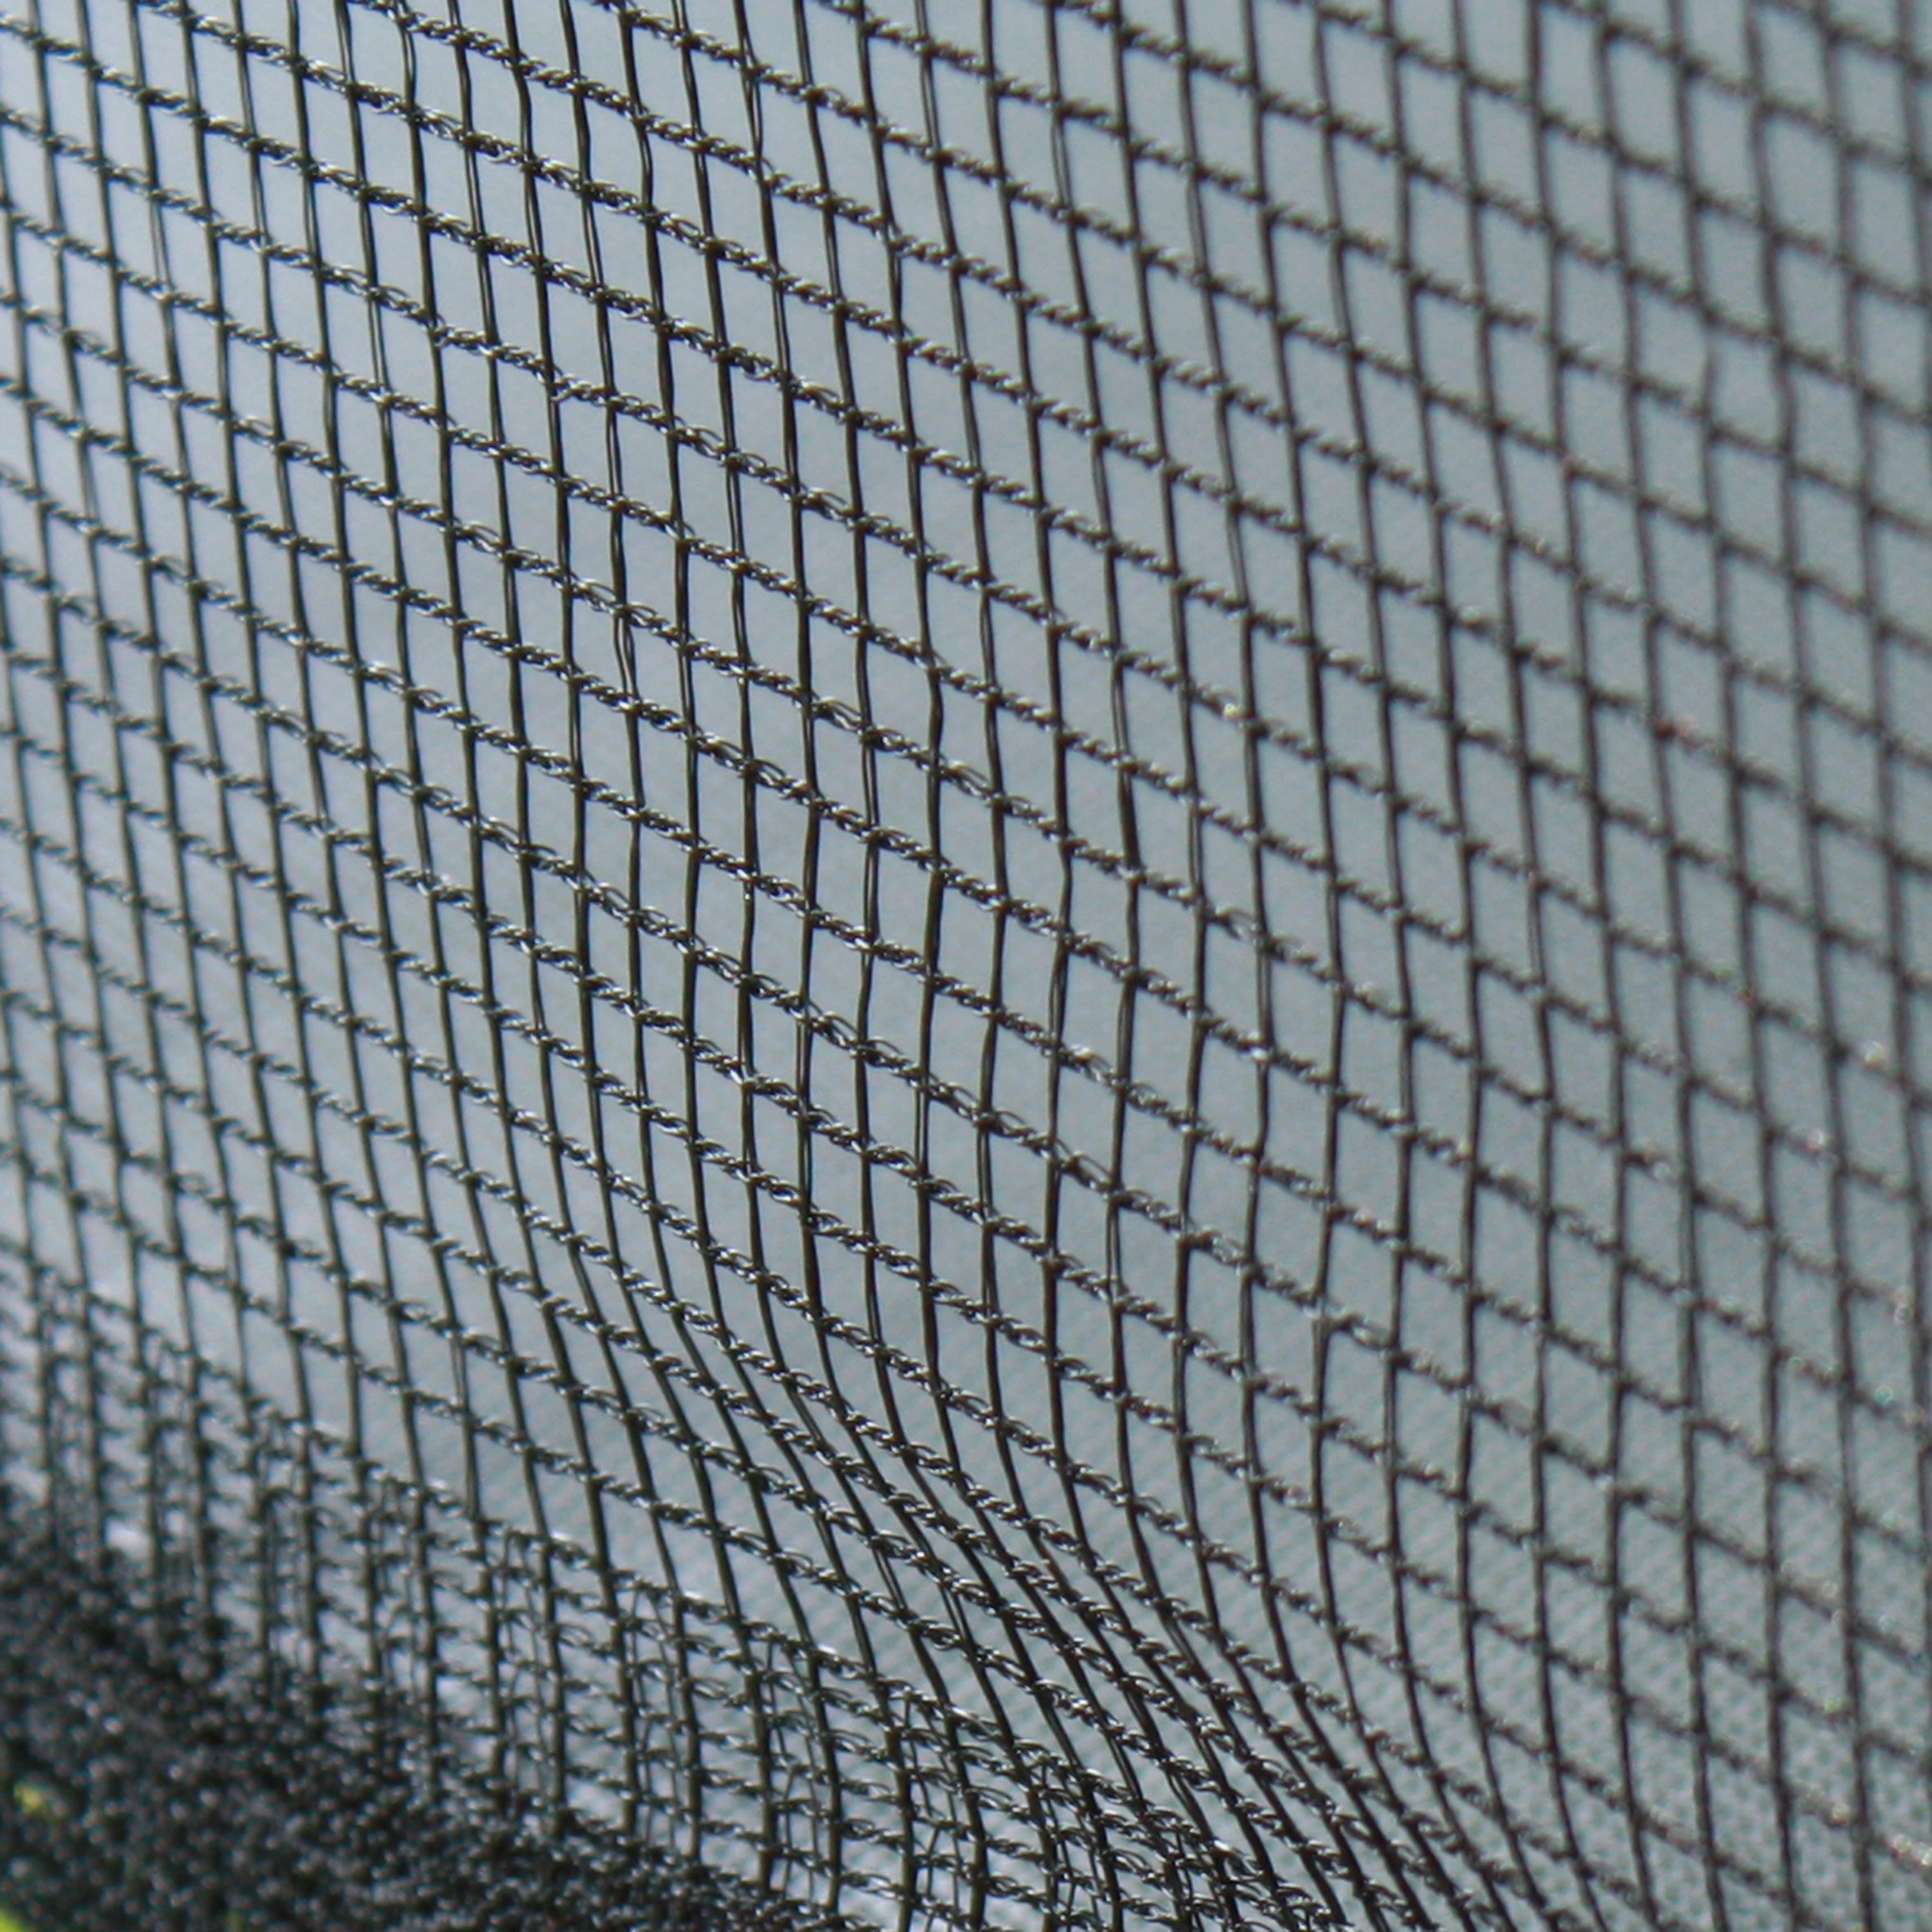 The tightly woven enclosure net is designed for 14-foot square trampolines.